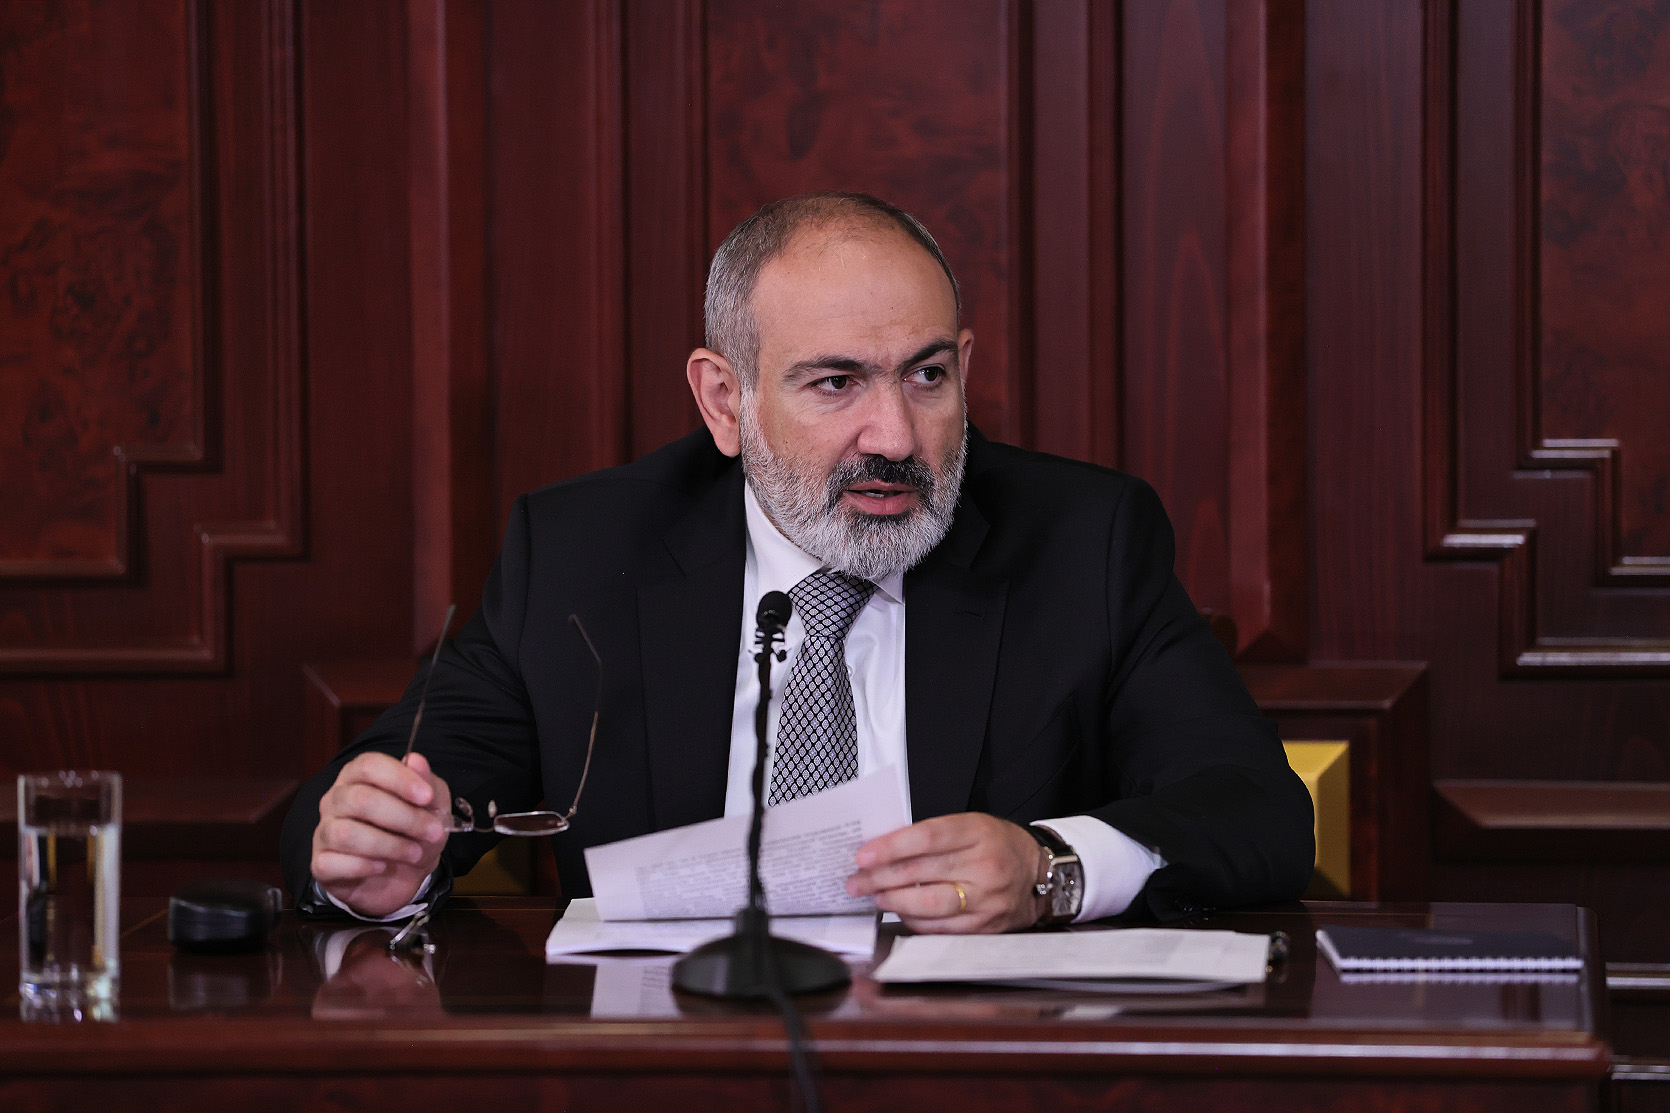 Pashinyan's responses to the parliamentary commission